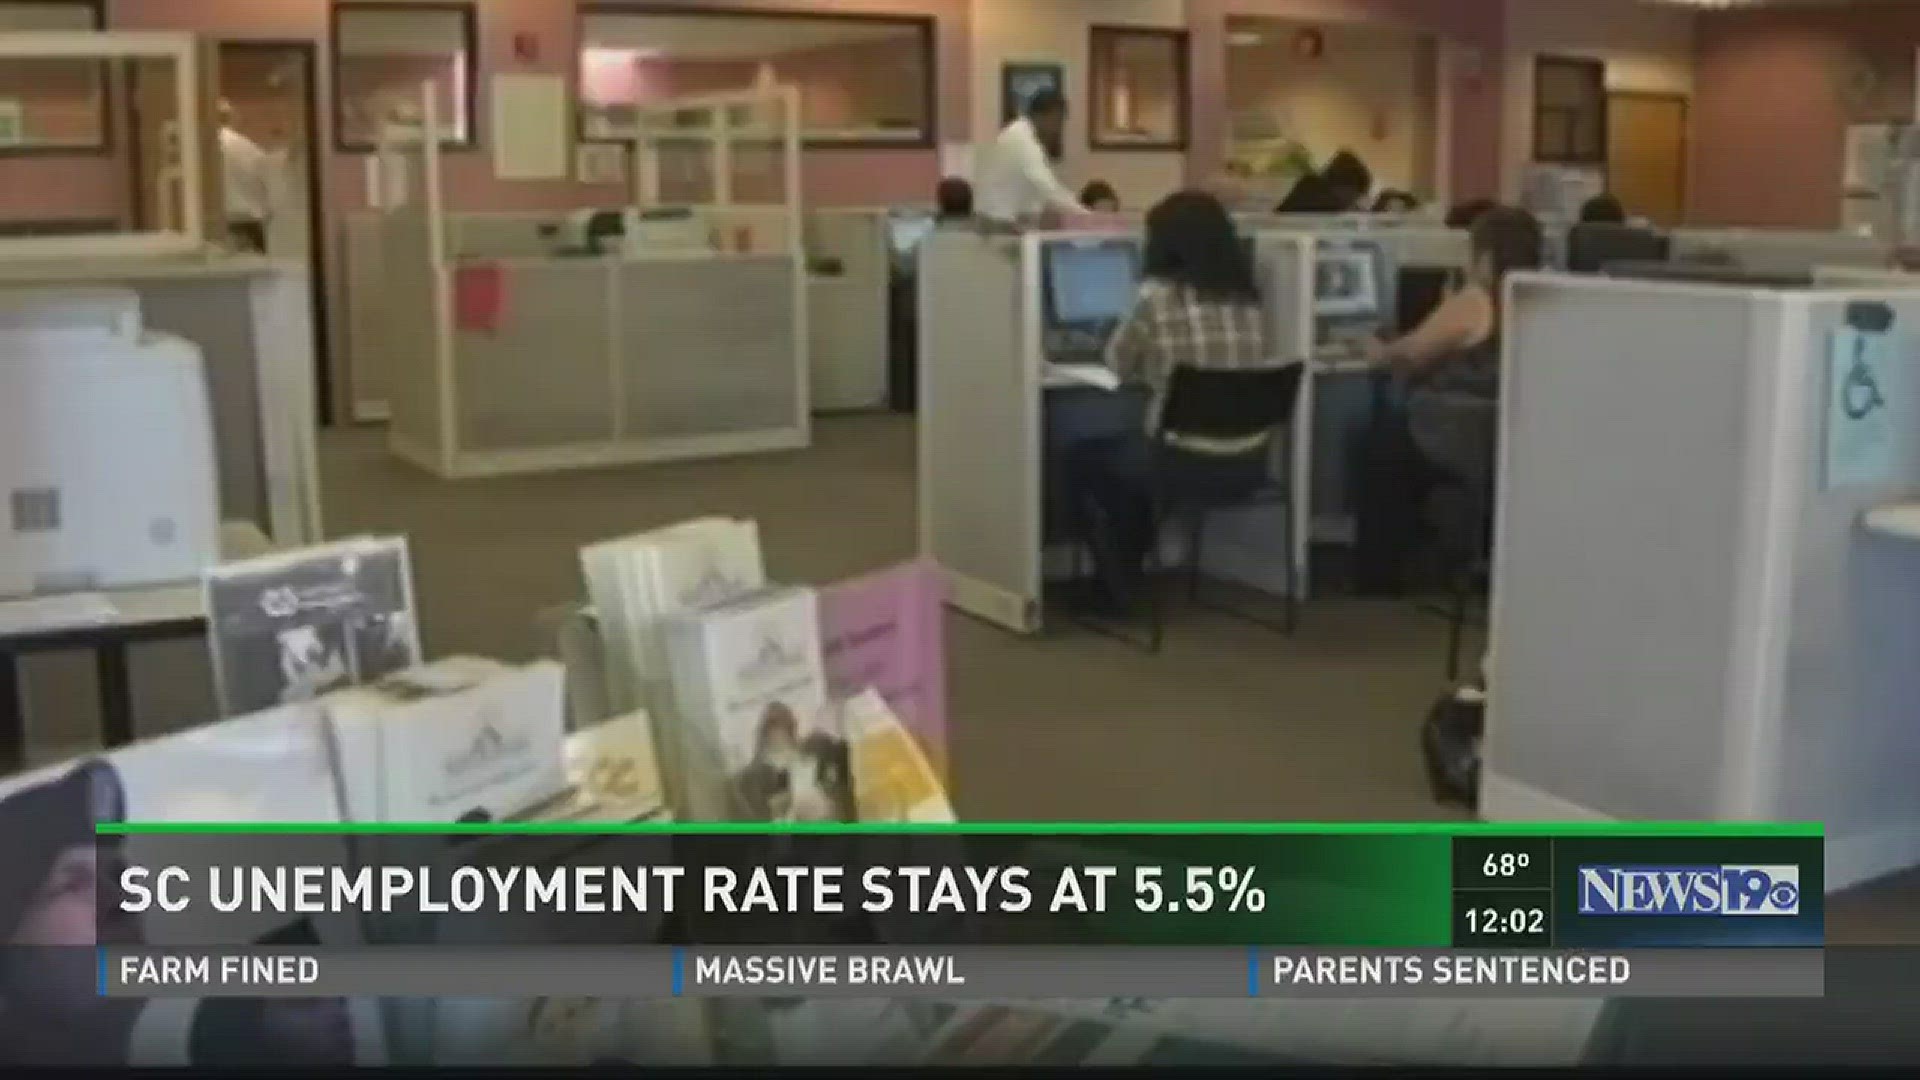 Unemployment rate remains at 5.5%